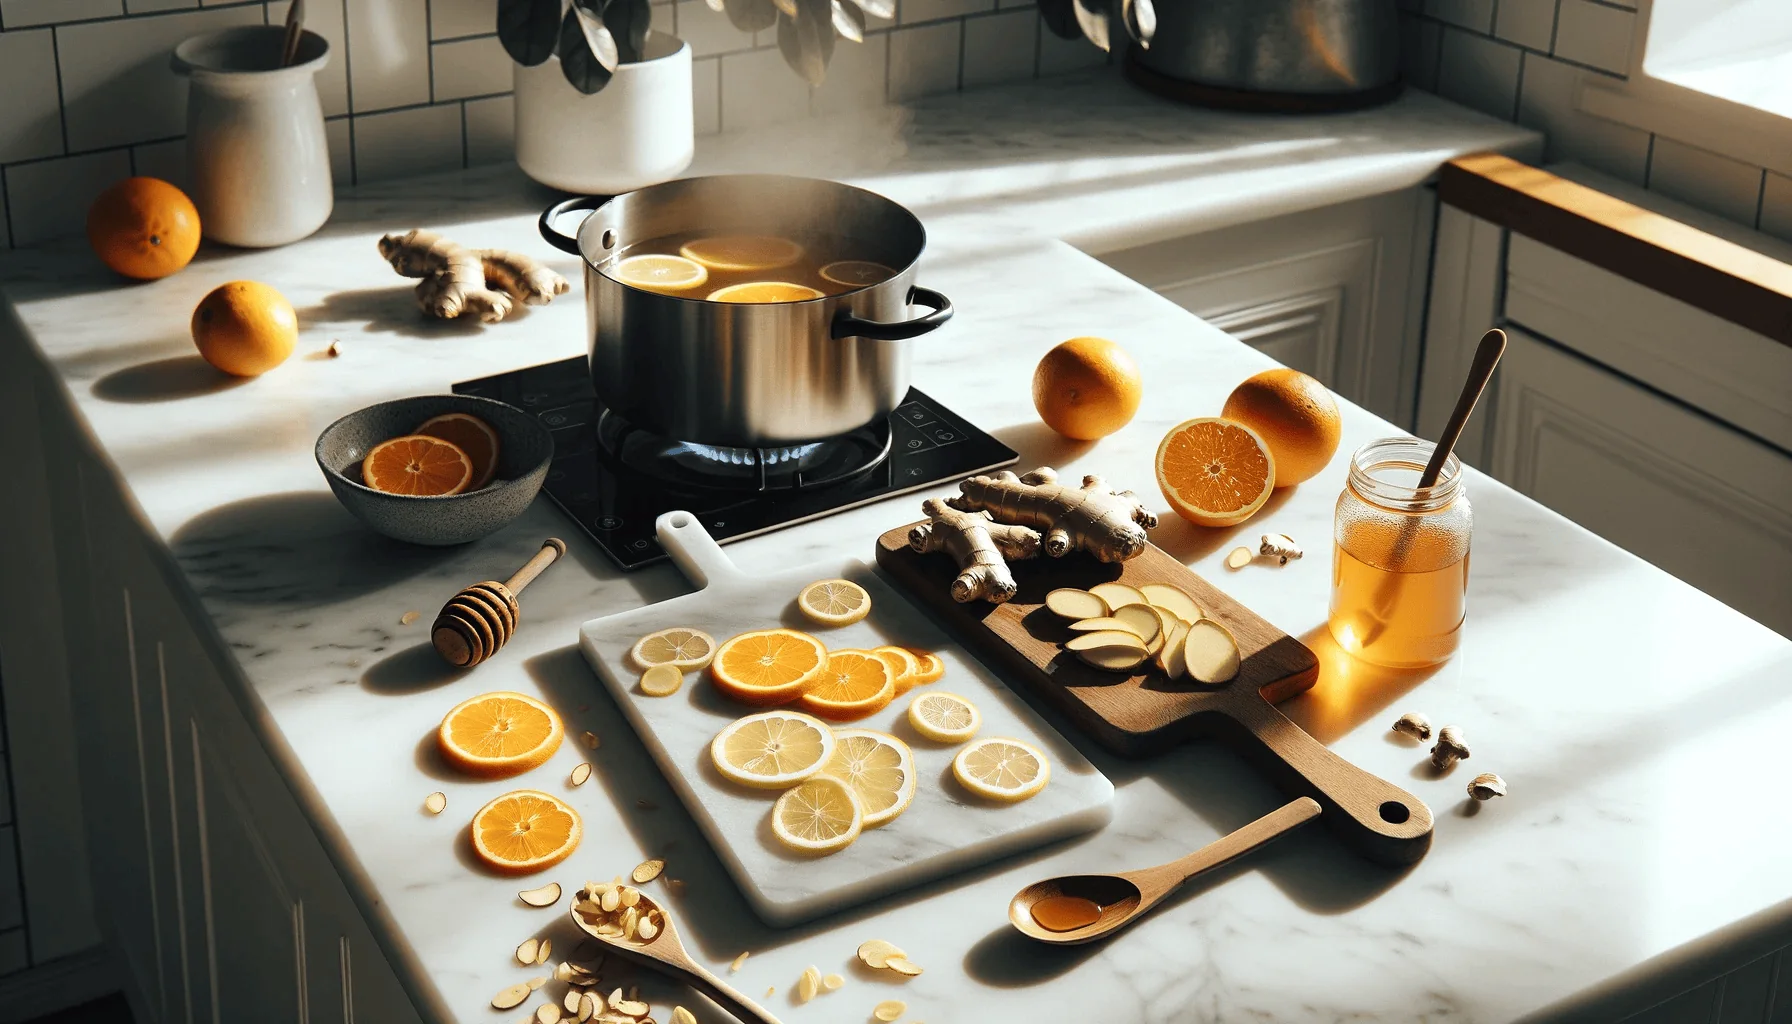 Mid-cooking scene with a pot of ginger-infused water steaming on the stove, with sliced citrus fruits and a half-used jar of honey